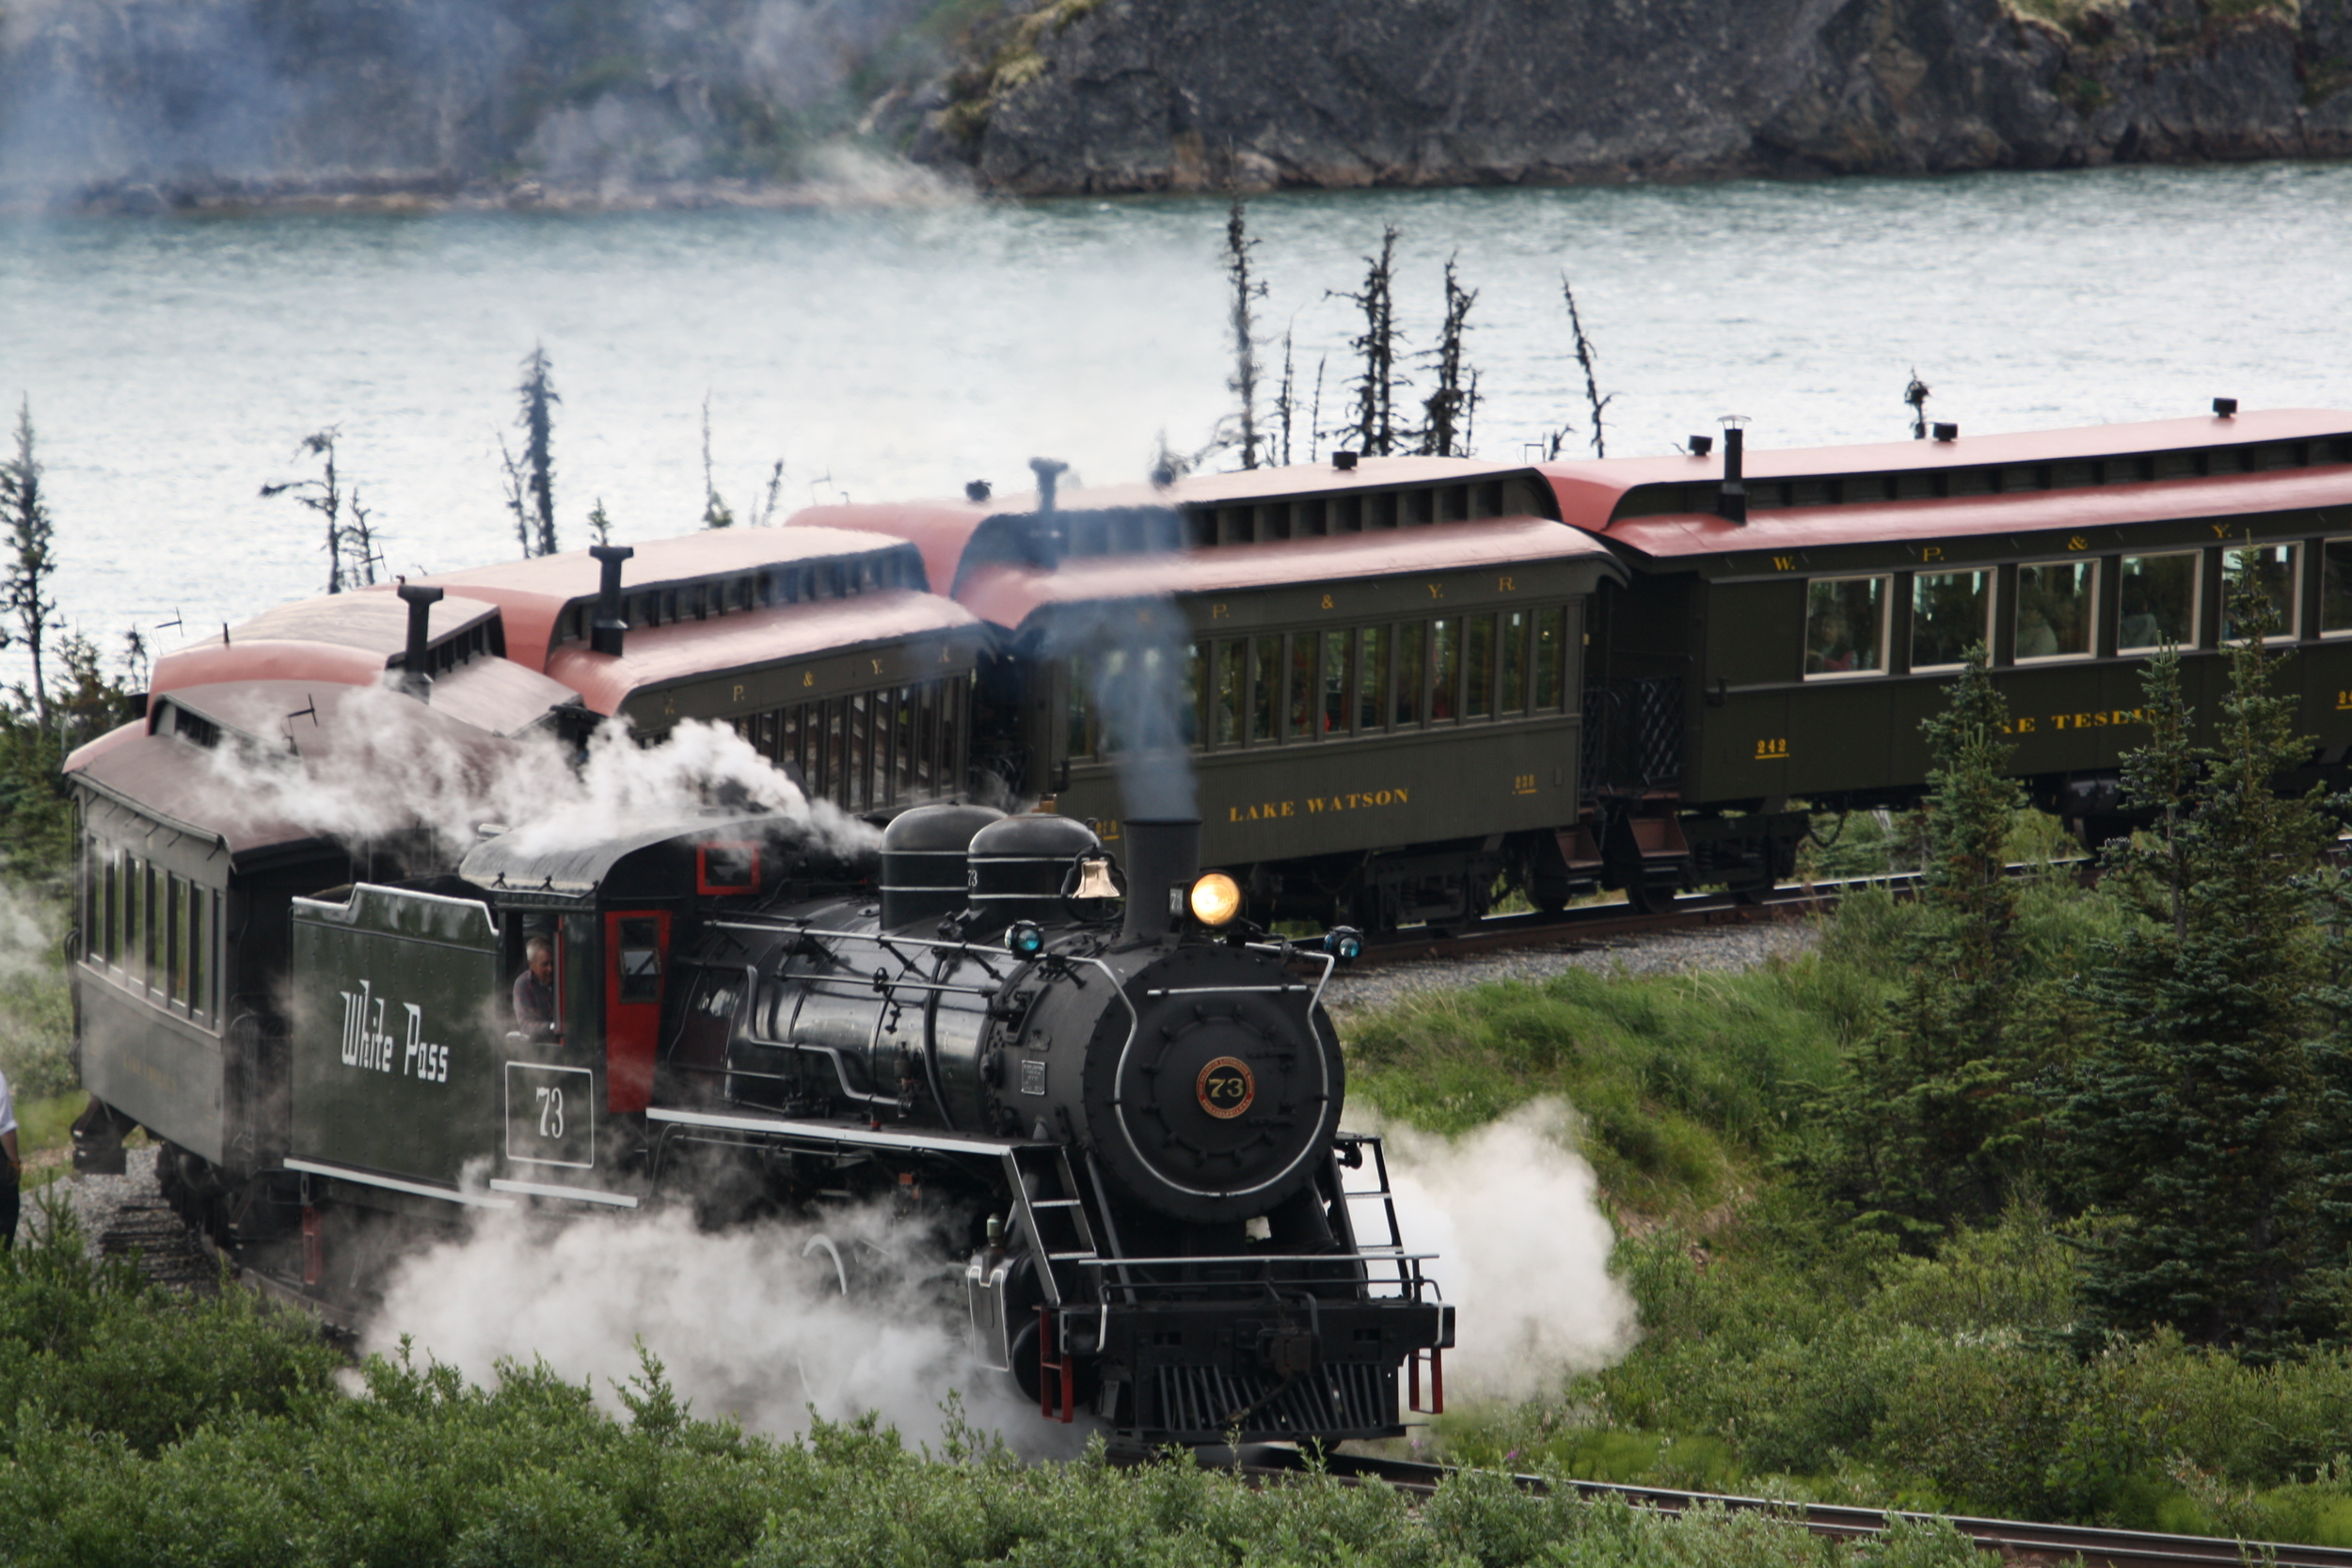 WP & Y RR photo tour from Skagway